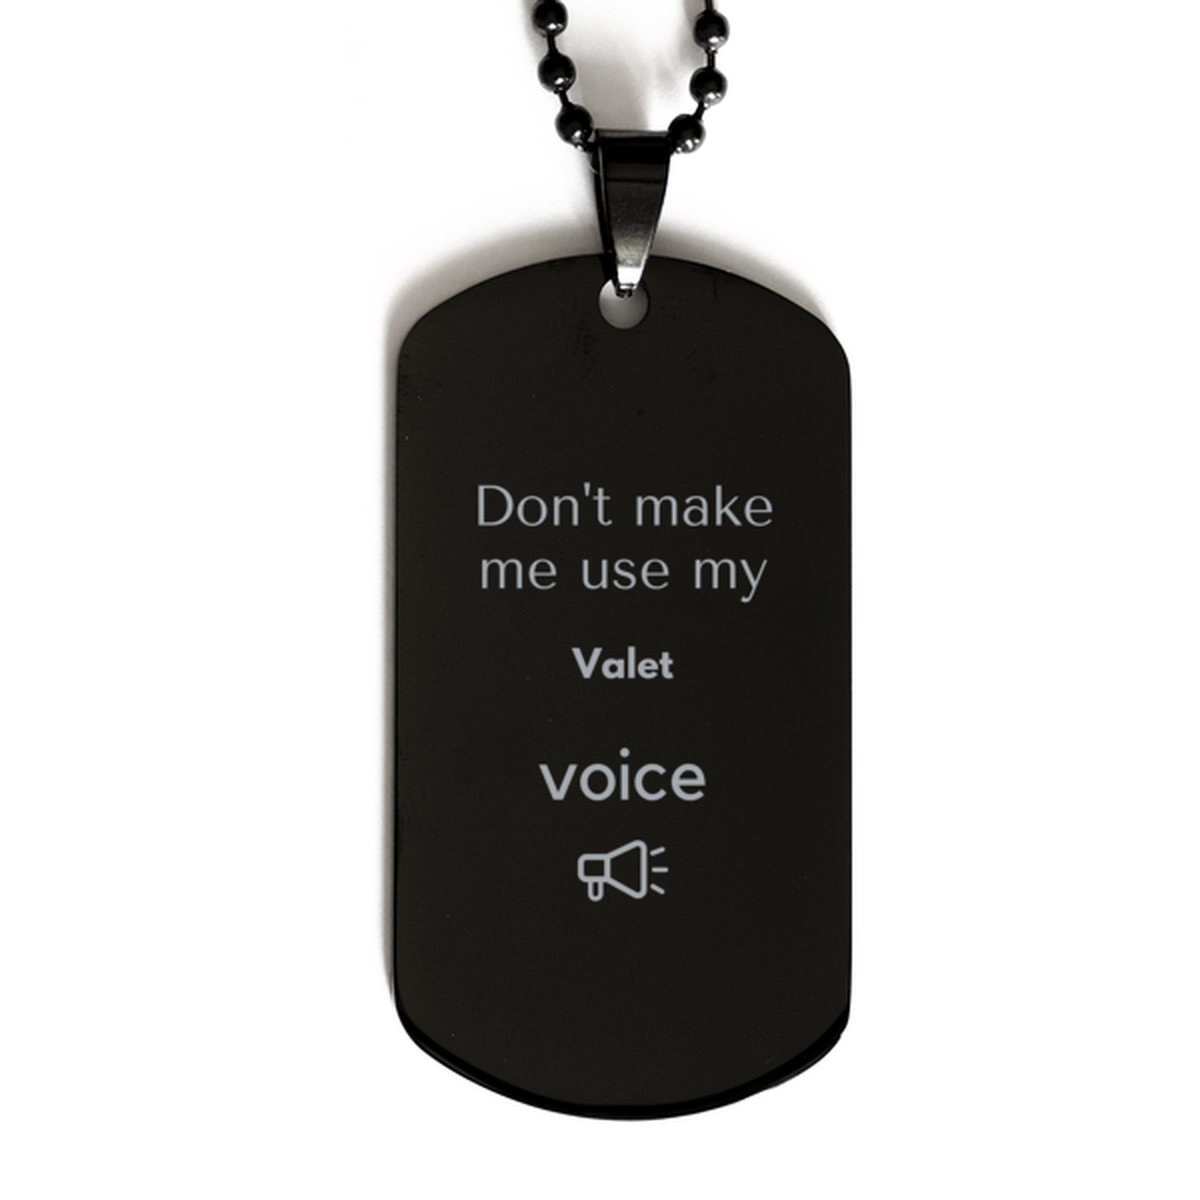 Don't make me use my Valet voice, Sarcasm Valet Gifts, Christmas Valet Black Dog Tag Birthday Unique Gifts For Valet Coworkers, Men, Women, Colleague, Friends